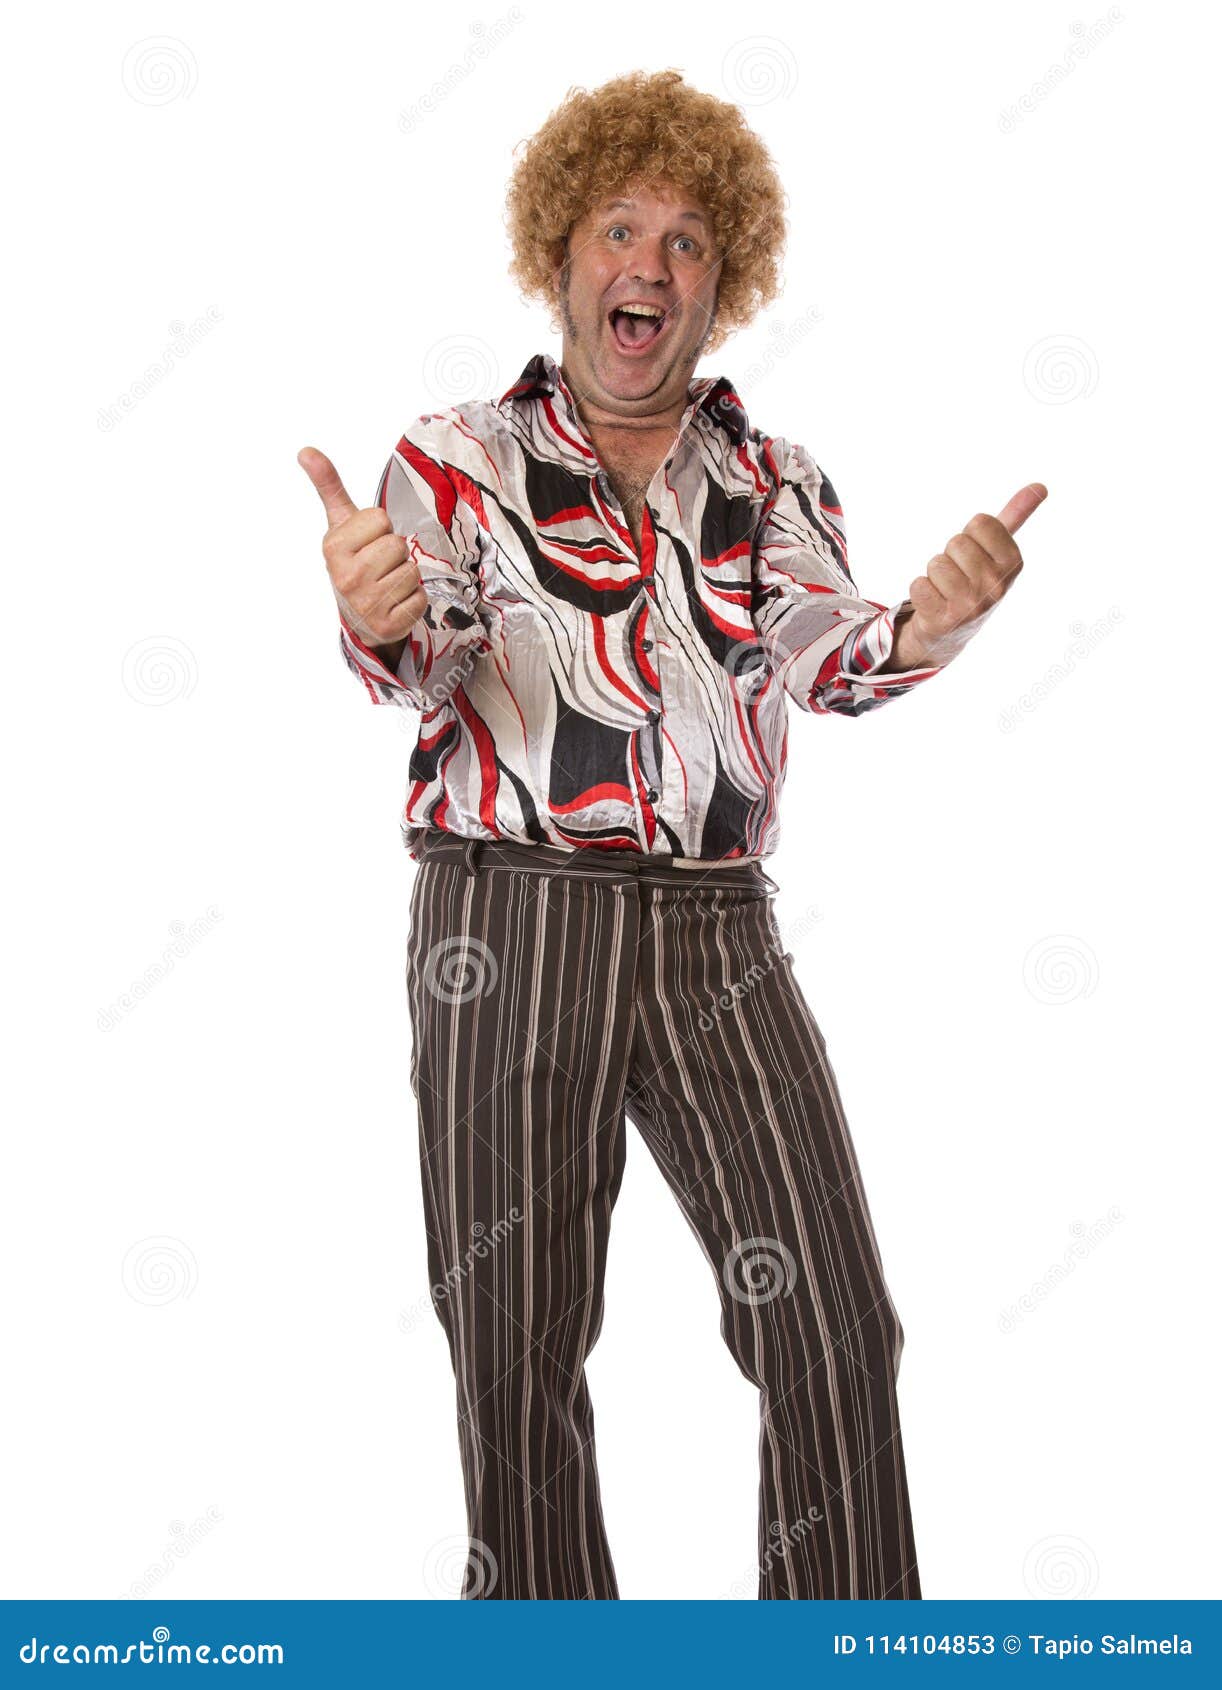 Thumbs Up Seventies Dude stock image. Image of portrait - 114104853